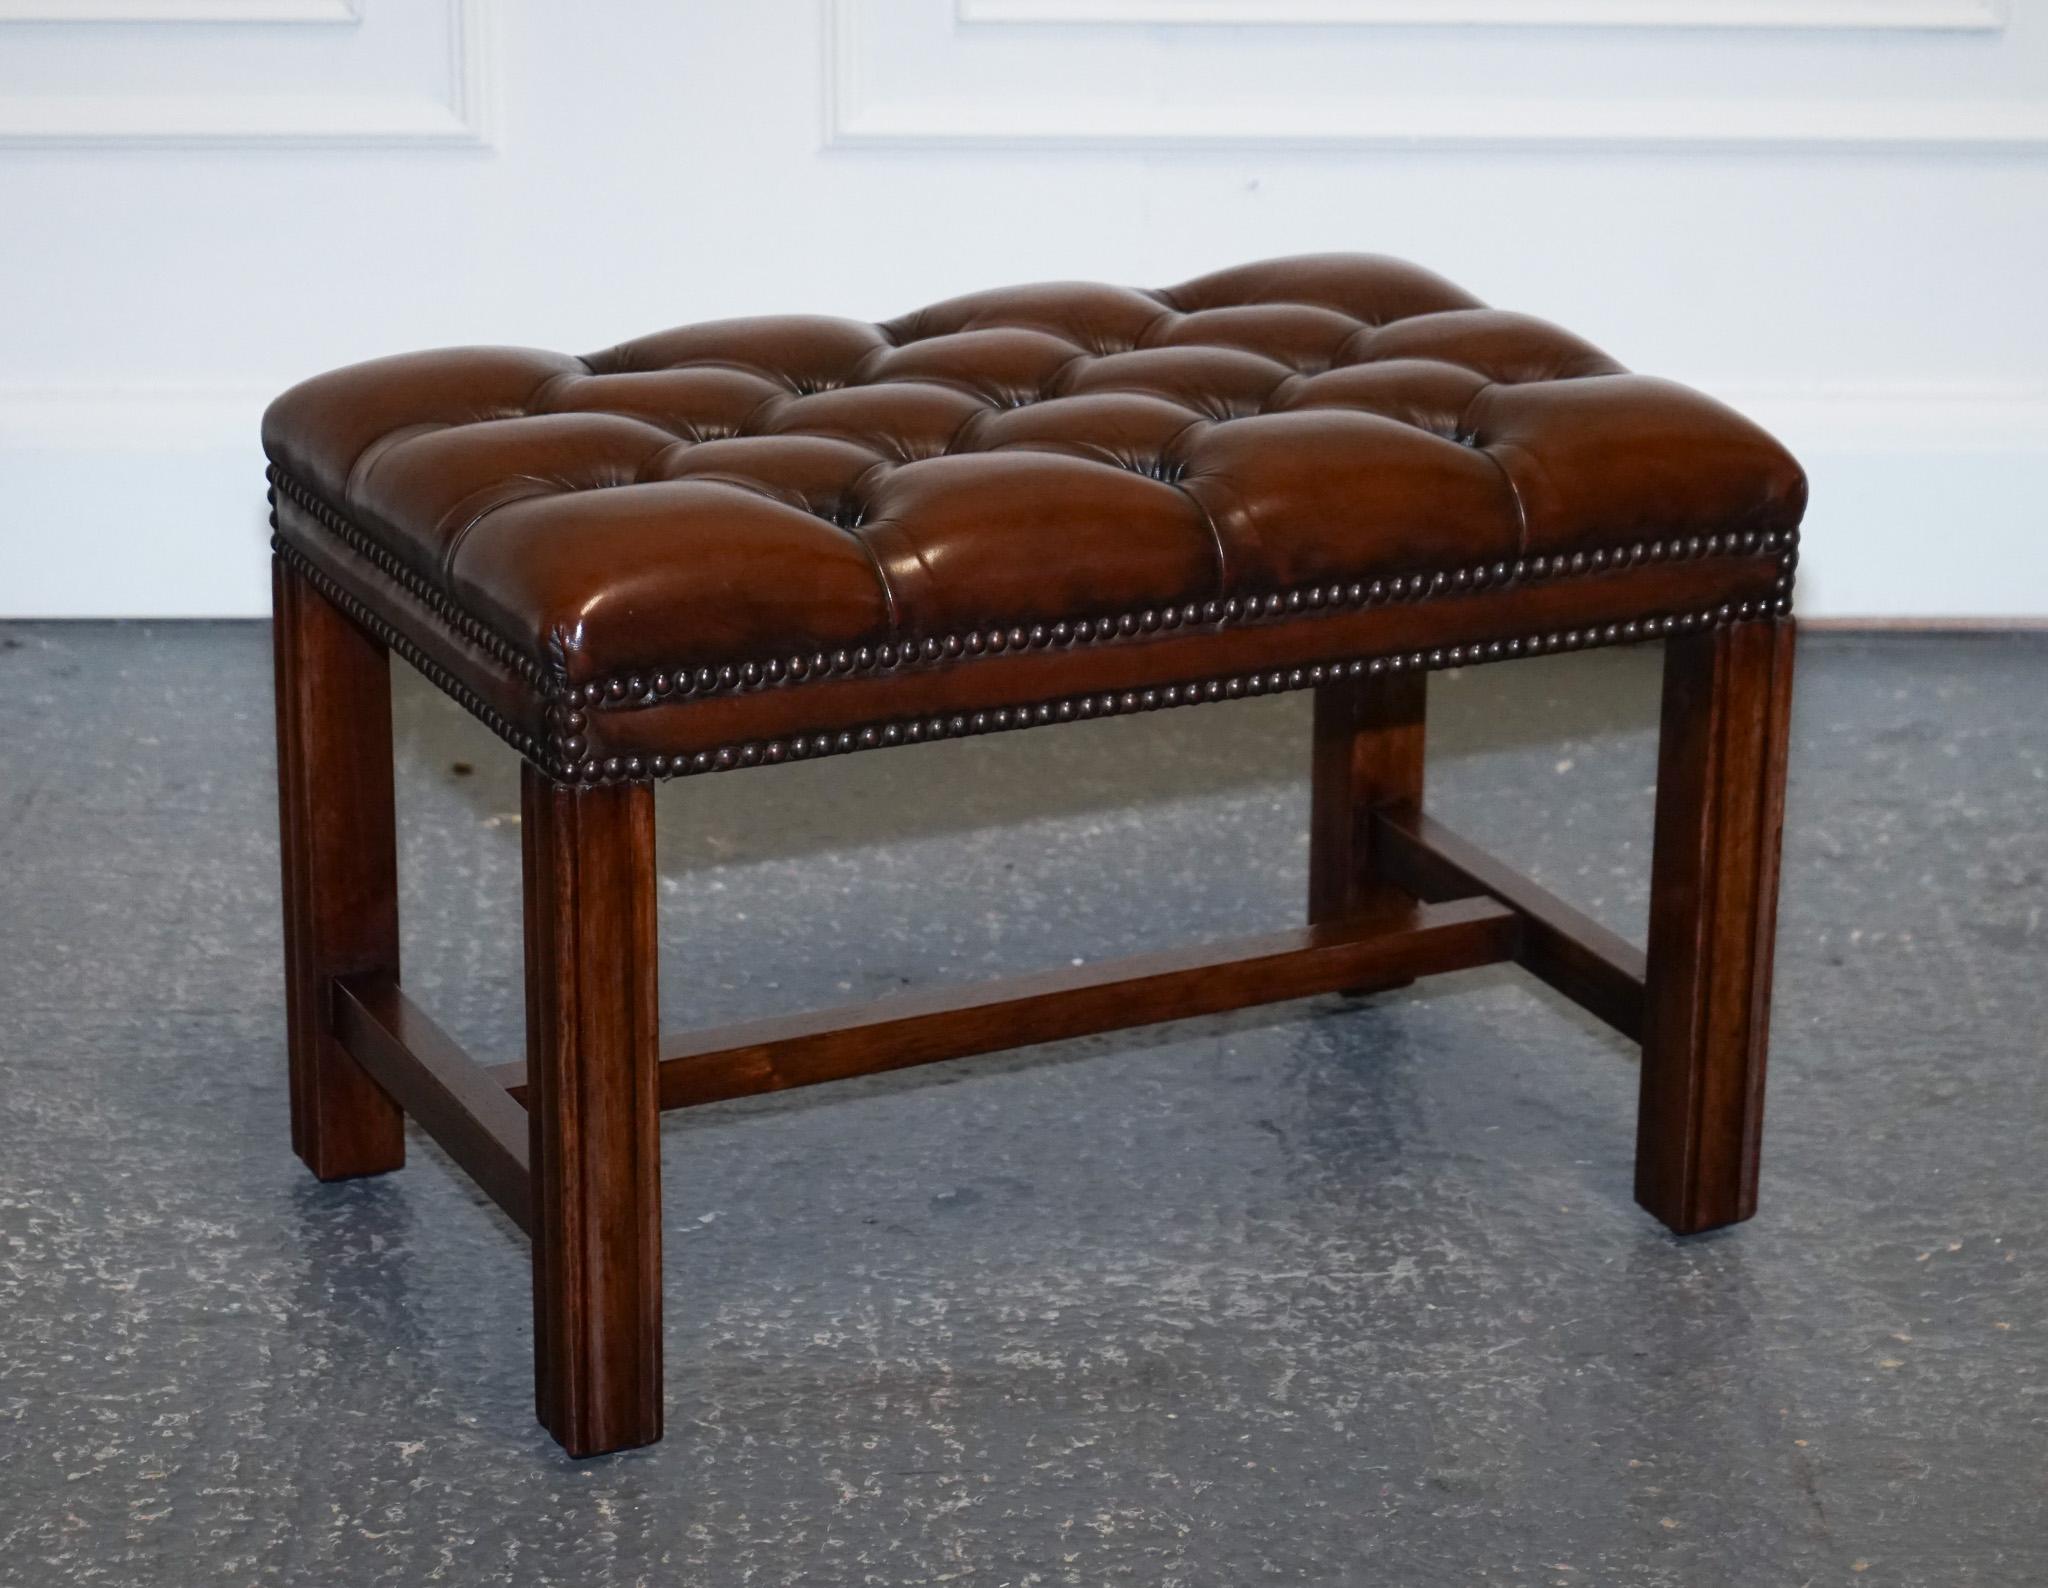 
We are delighted to offer for sale this Gorgeous Vintage Georgian Style Hand Dyed Leather Tufted Footstool.

A very good-looking and well-made stool, it has been hand dyed this nice whiskey brown colour, and the leather is held in place with